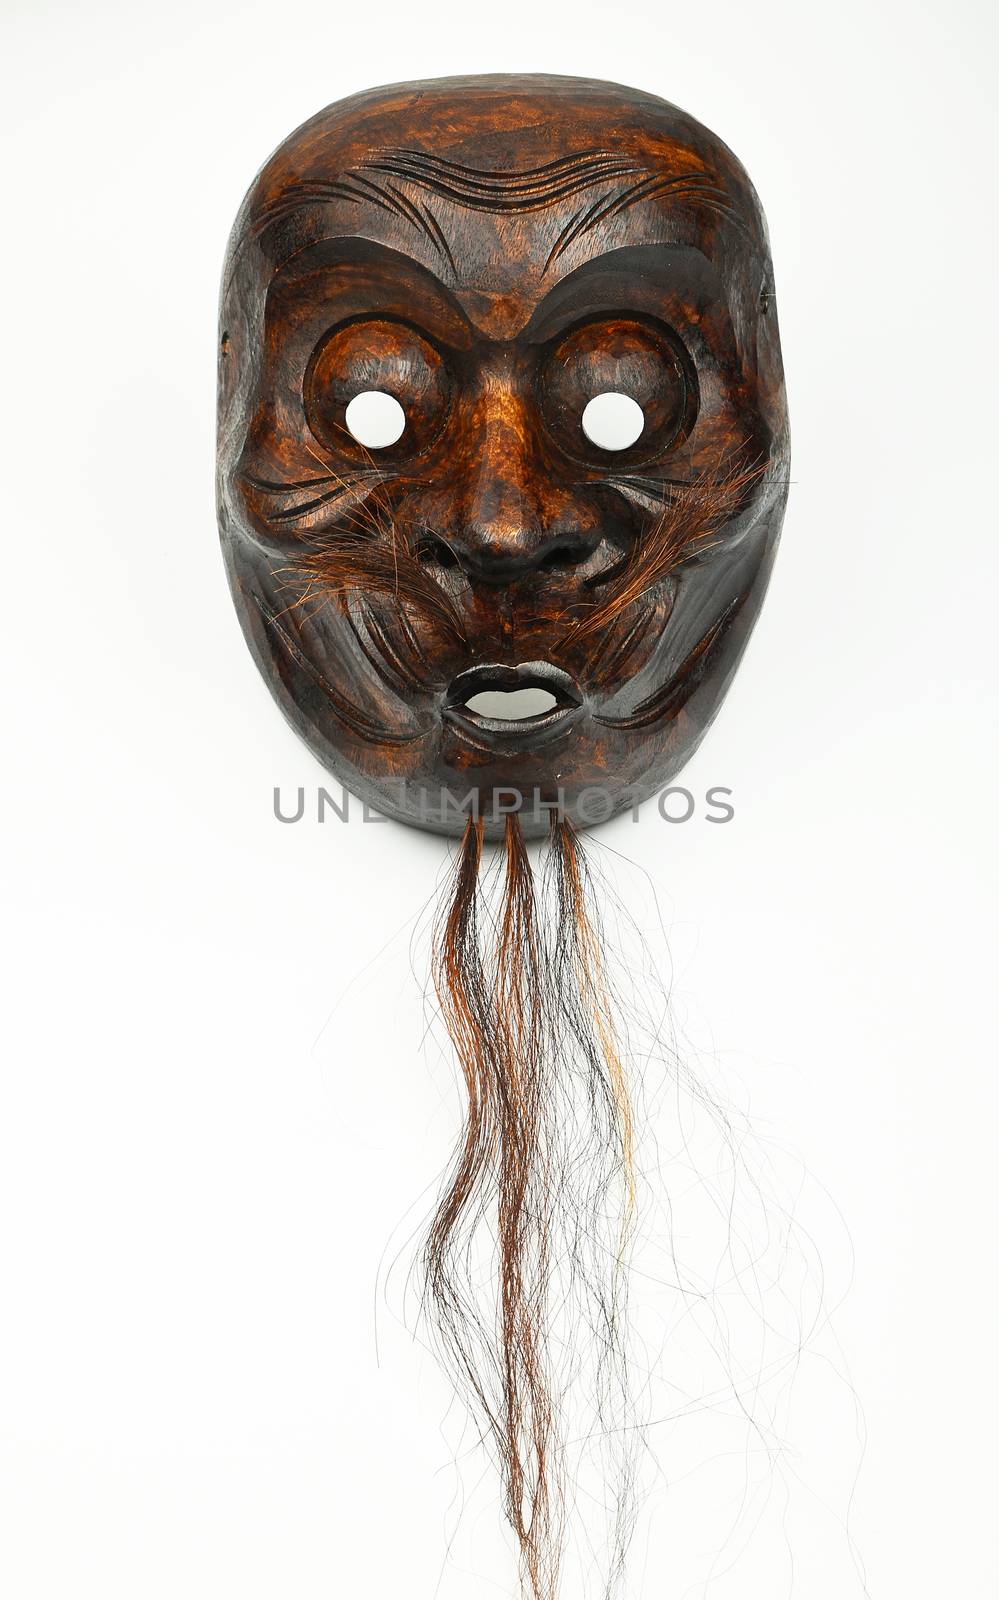 Japanese wooden carved theater mask of human face with beard and moustache isolated on white background